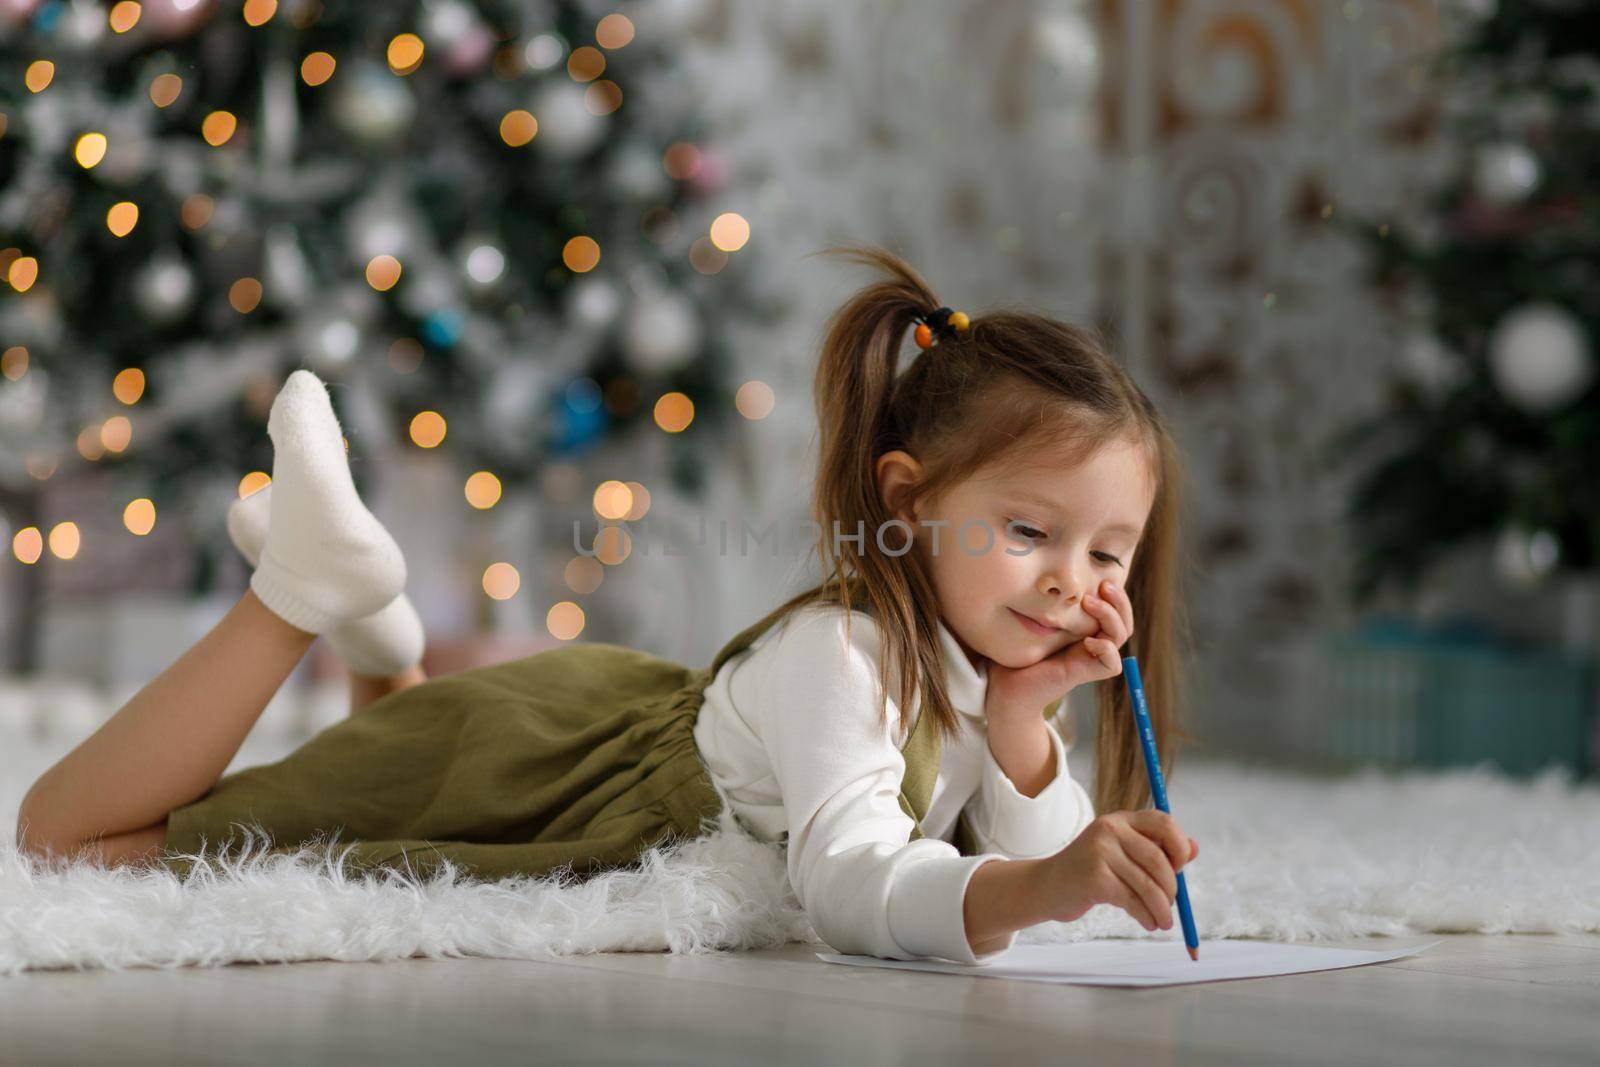 Cute little girl with ponytails is writing a letter to santa claus in christmas interior.